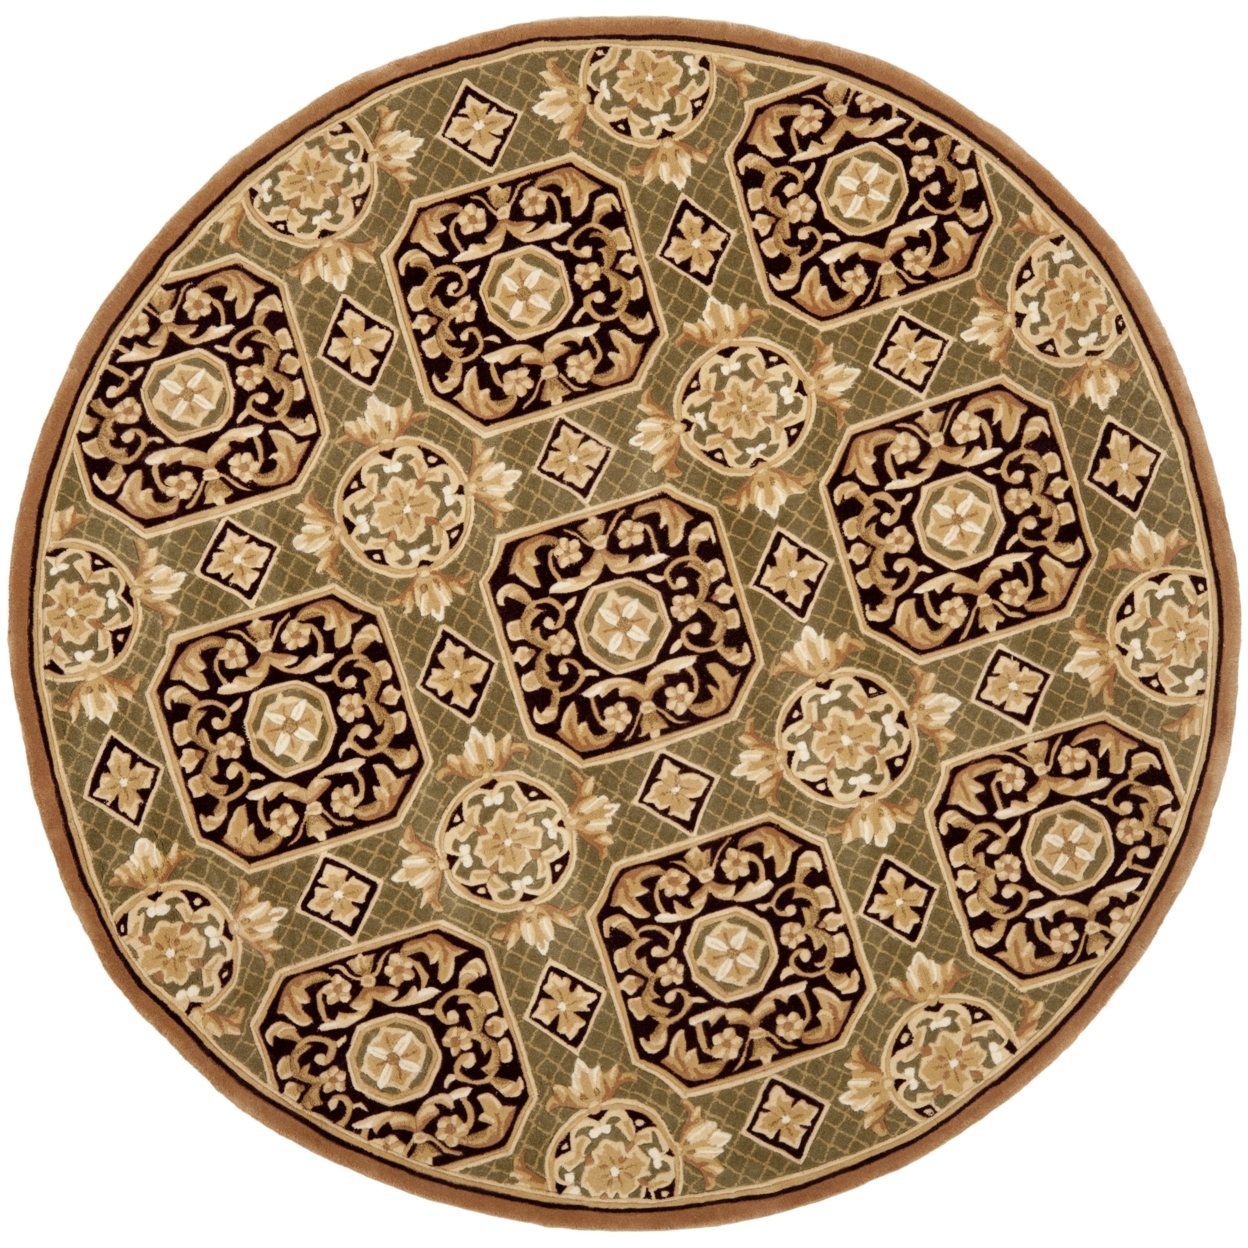 SAFAVIEH Naples Collection NA706A Handmade Assorted Rug - 8' Round